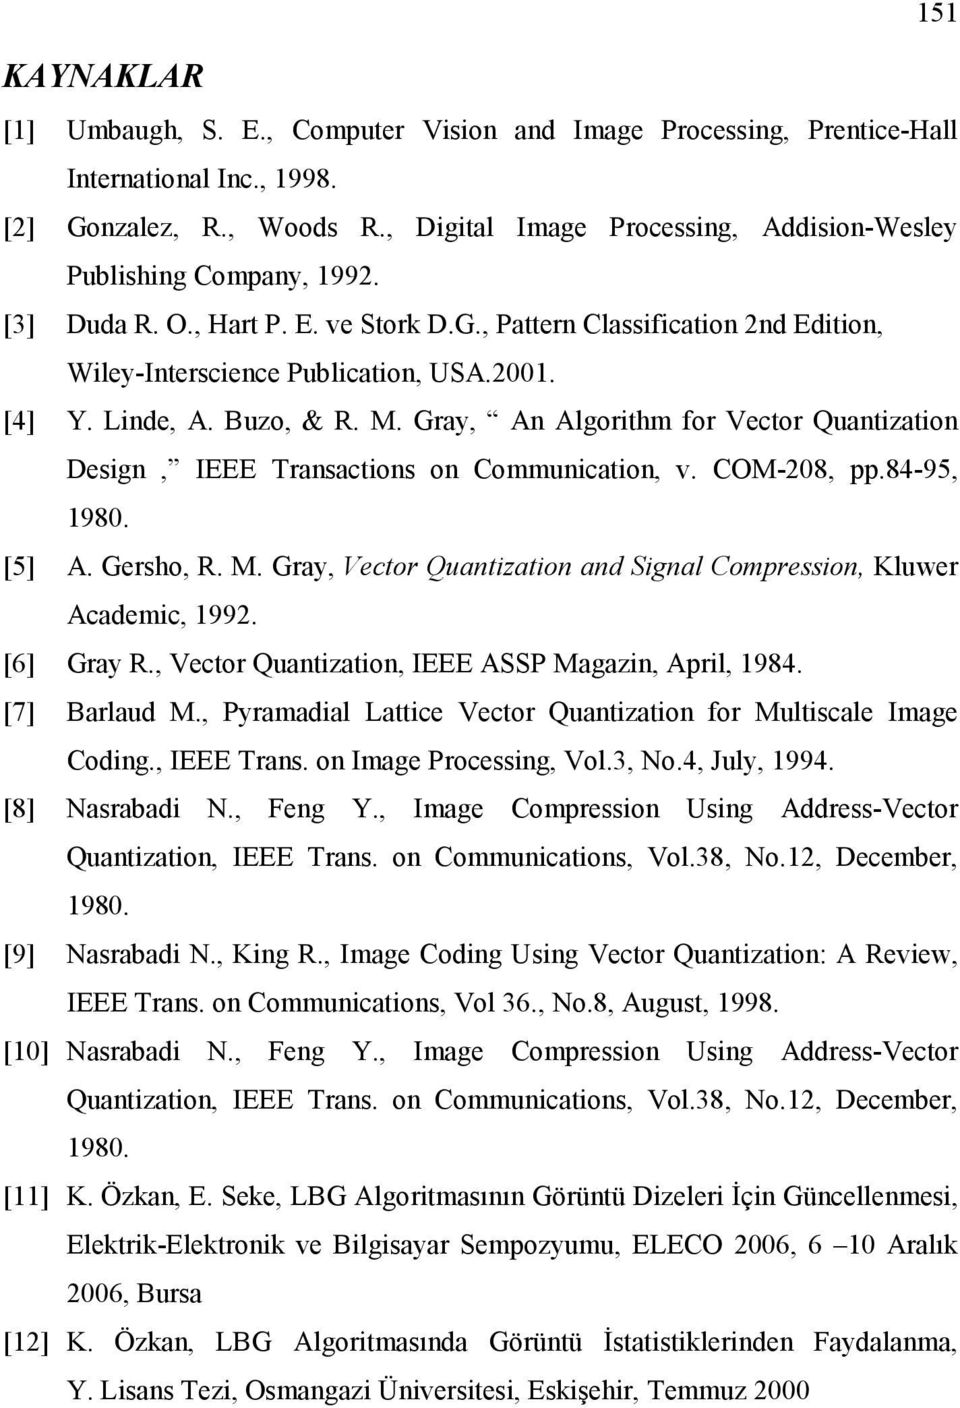 Linde, A. Buzo, & R. M. Gray, An Algorithm for Vector Quantization Design, IEEE Transactions on Communication, v. COM-208, pp.84-95, 1980. [5] A. Gersho, R. M. Gray, Vector Quantization and Signal Compression, Kluwer Academic, 1992.